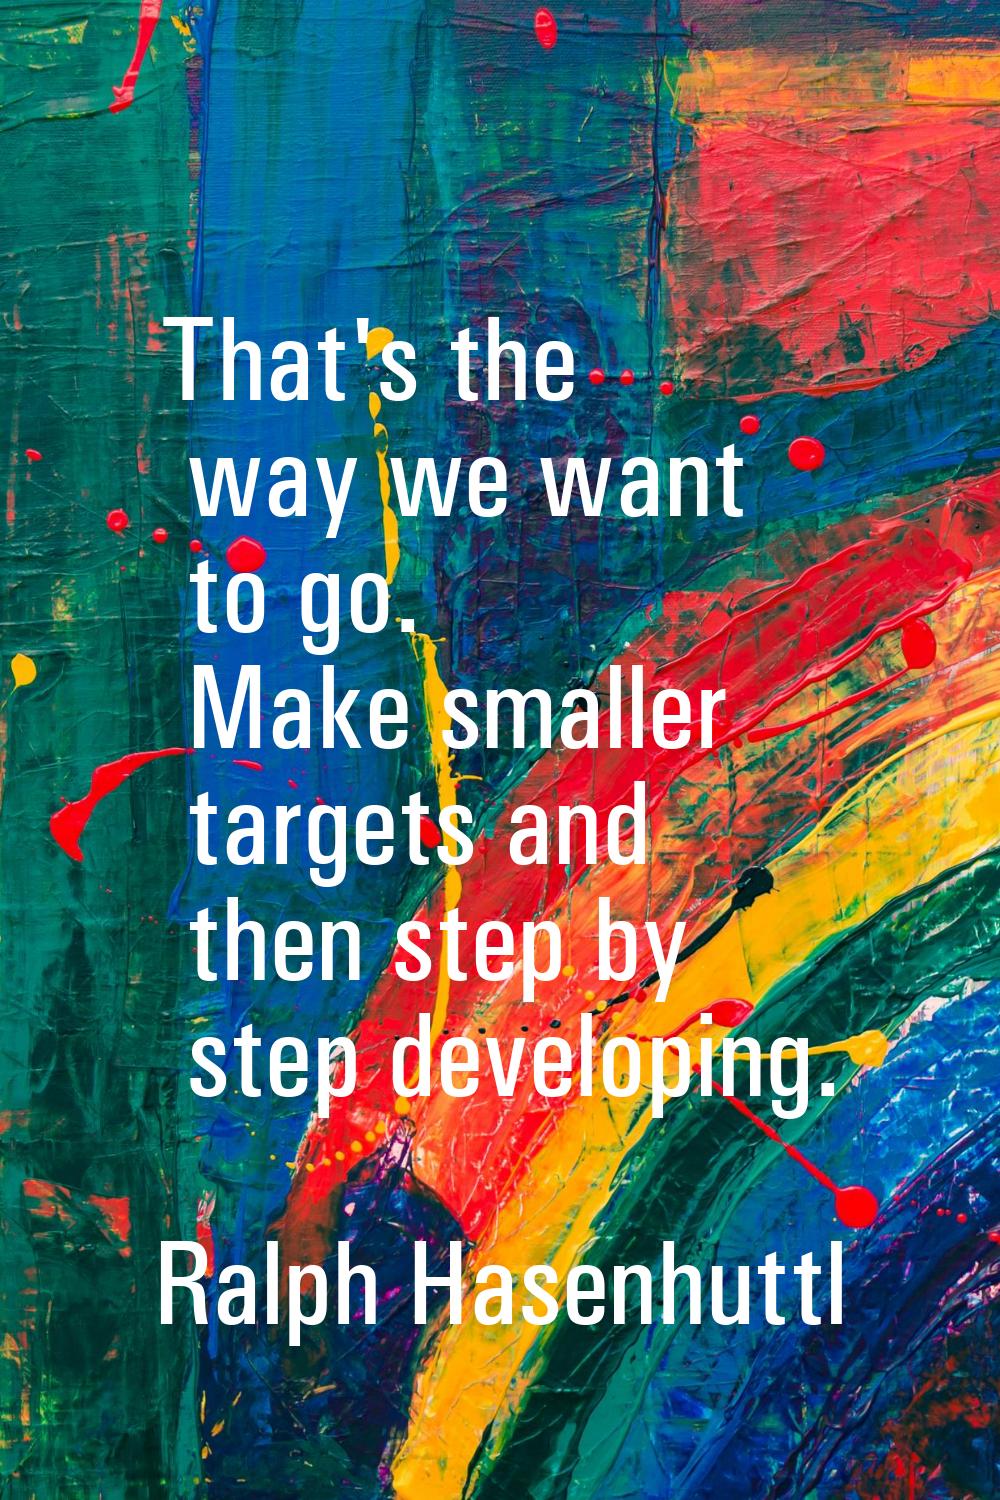 That's the way we want to go. Make smaller targets and then step by step developing.